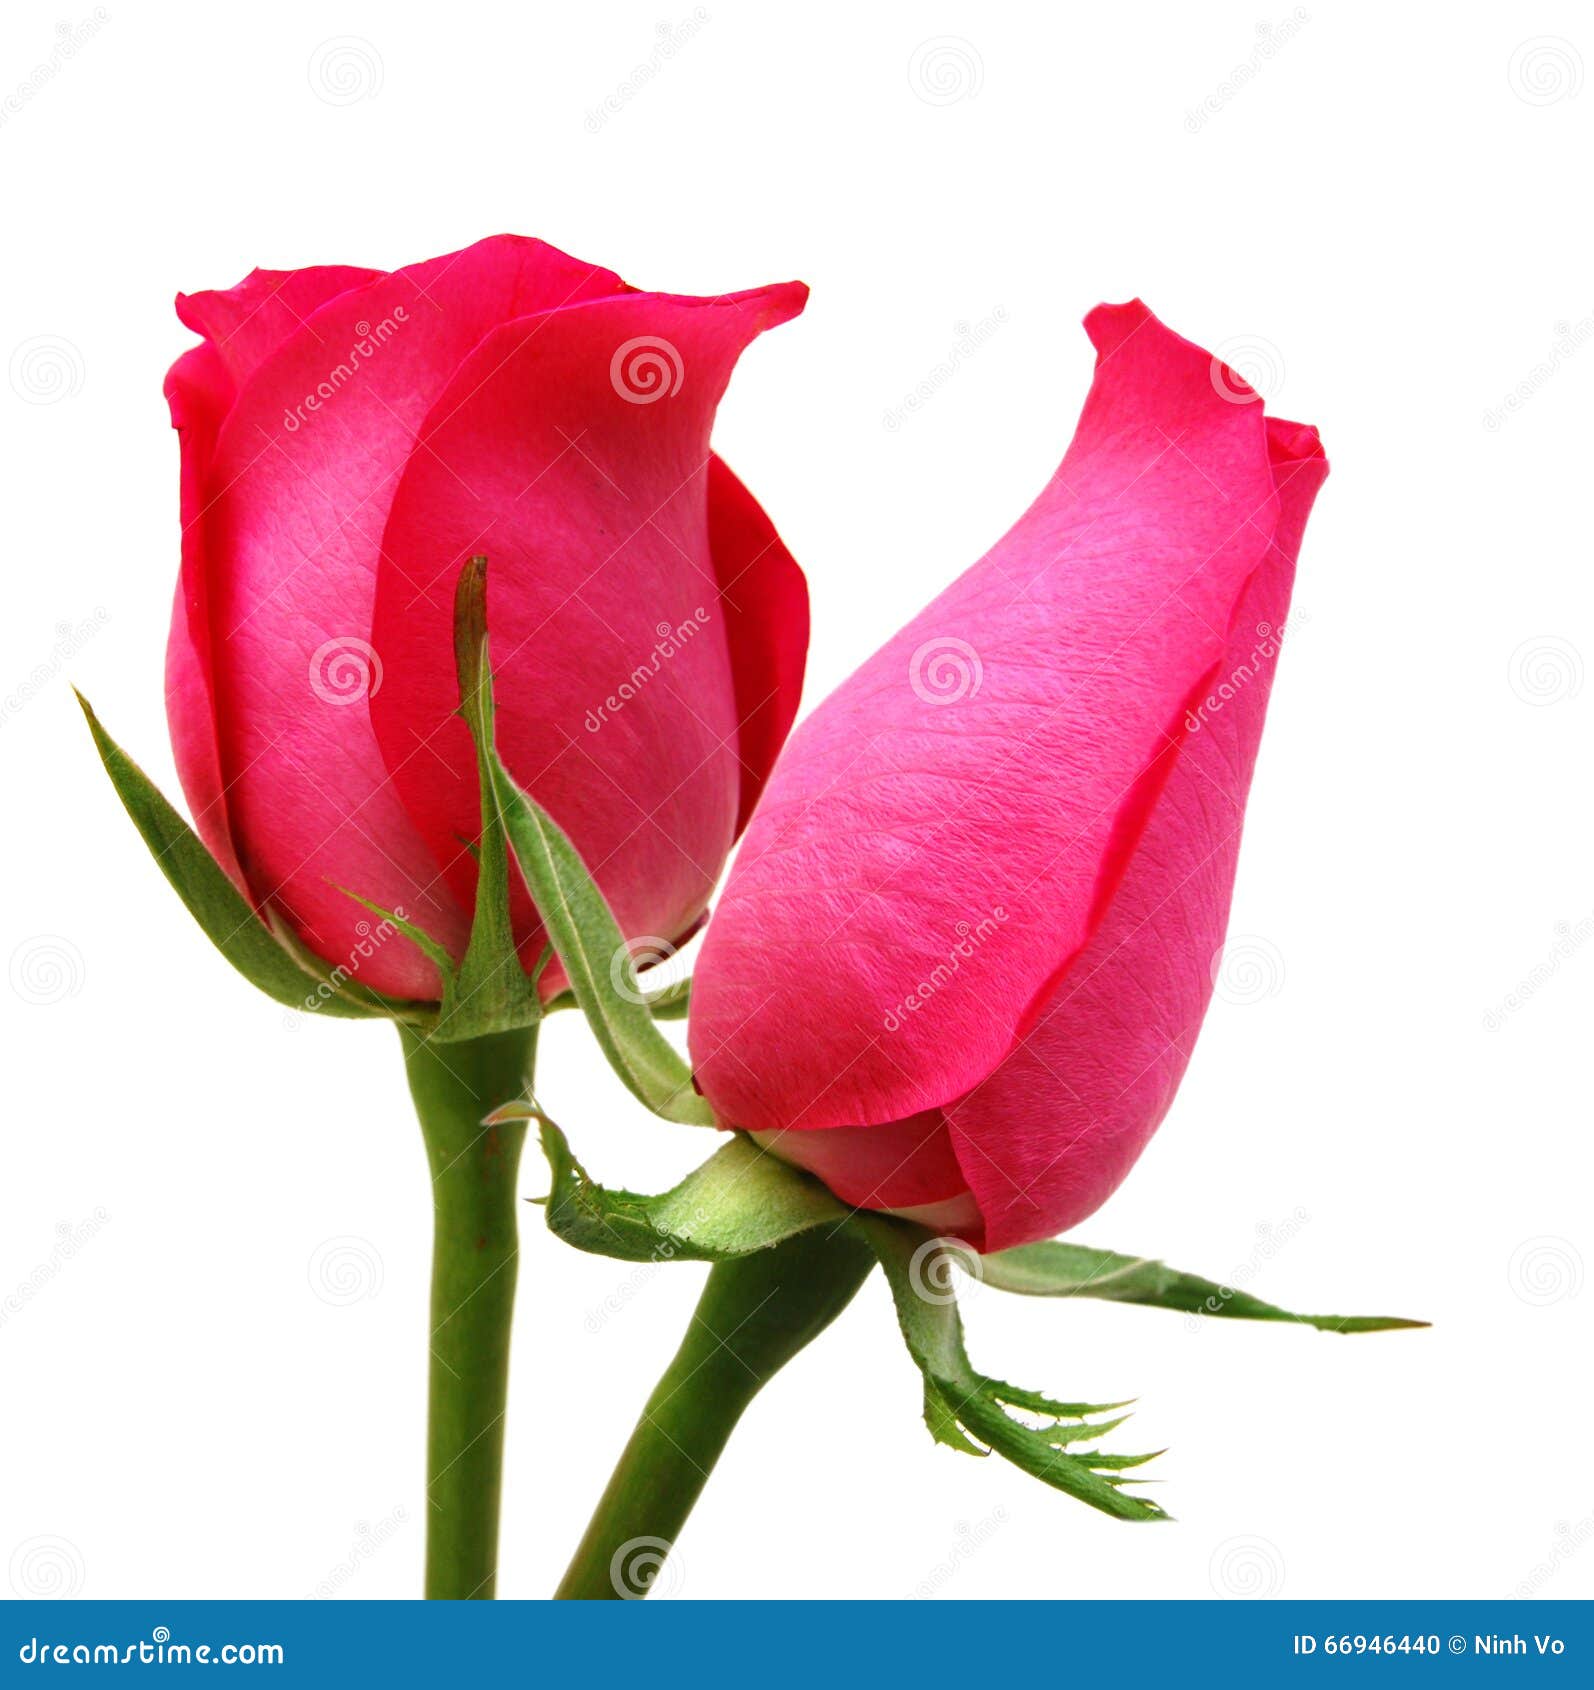 Two Pink rose stock photo. Image of white, natural, vegetative - 66946440